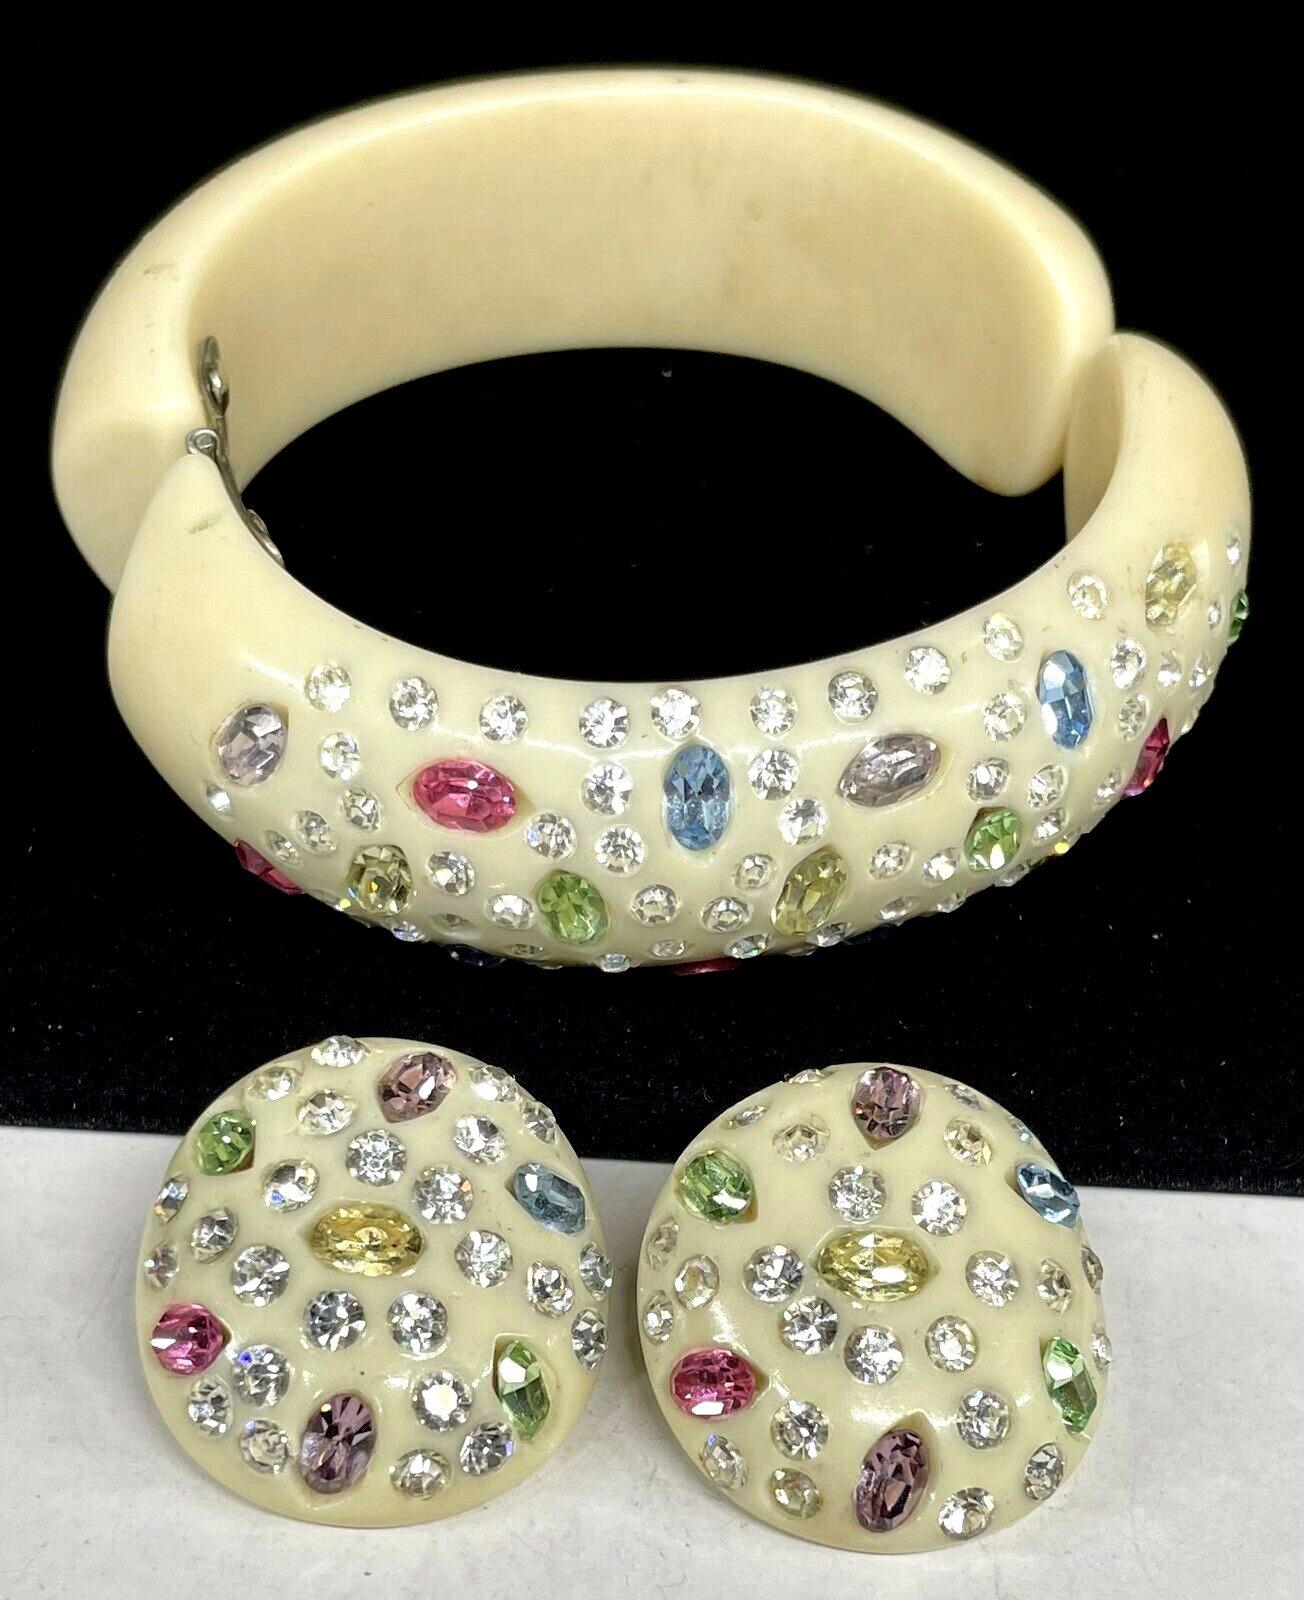 Mixed Cut Vintage Rare Weiss Designer Signed Lucite Crystal Clamper Bracelet and Earrings